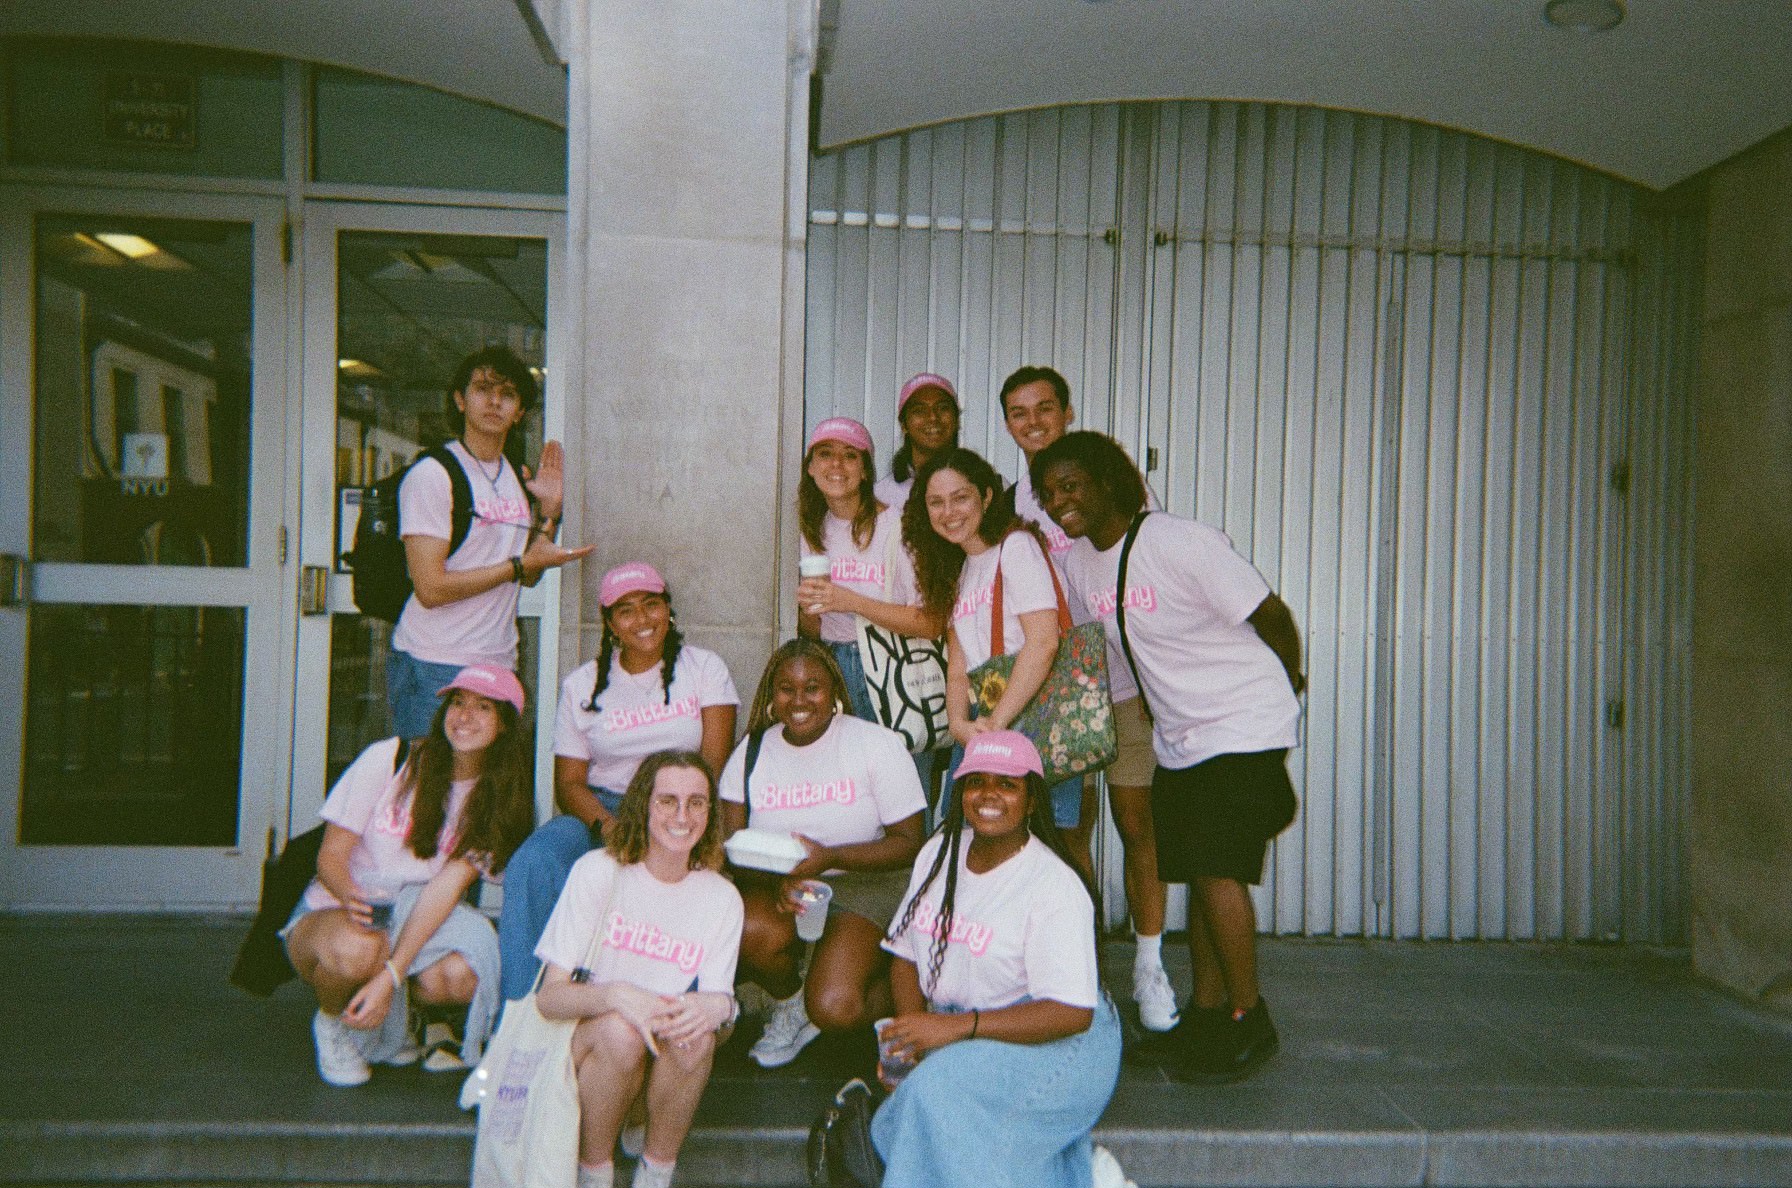 A group of resident assistants posing outside of a residence hall.